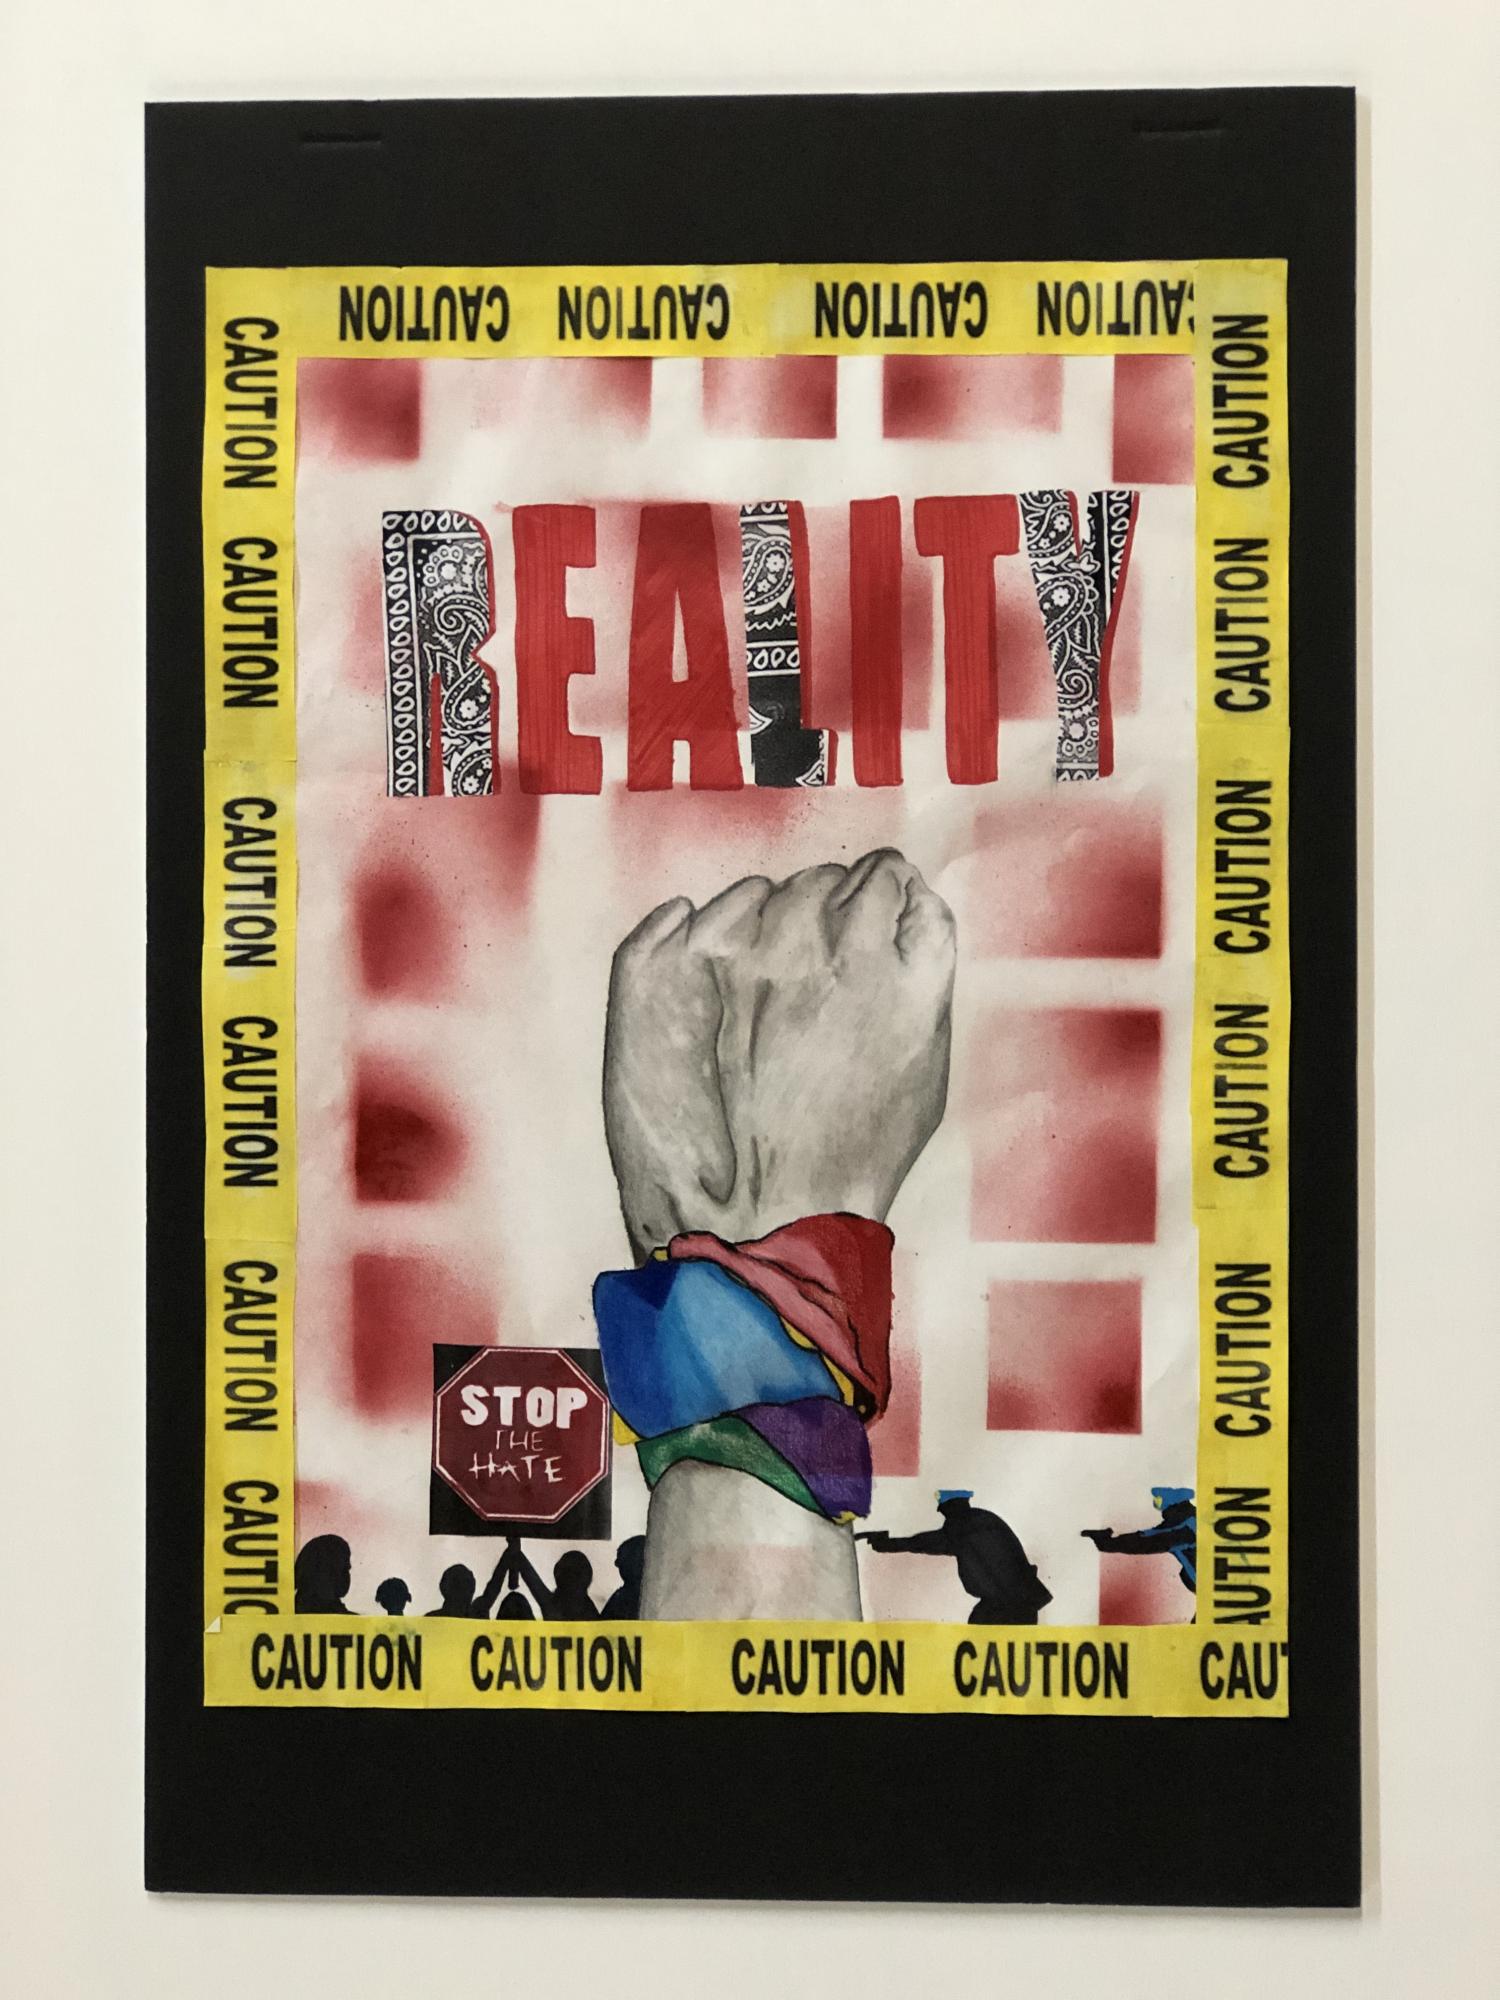 Mixed media piece with central fist under the word reality; the image is outlined with yellow caution tape